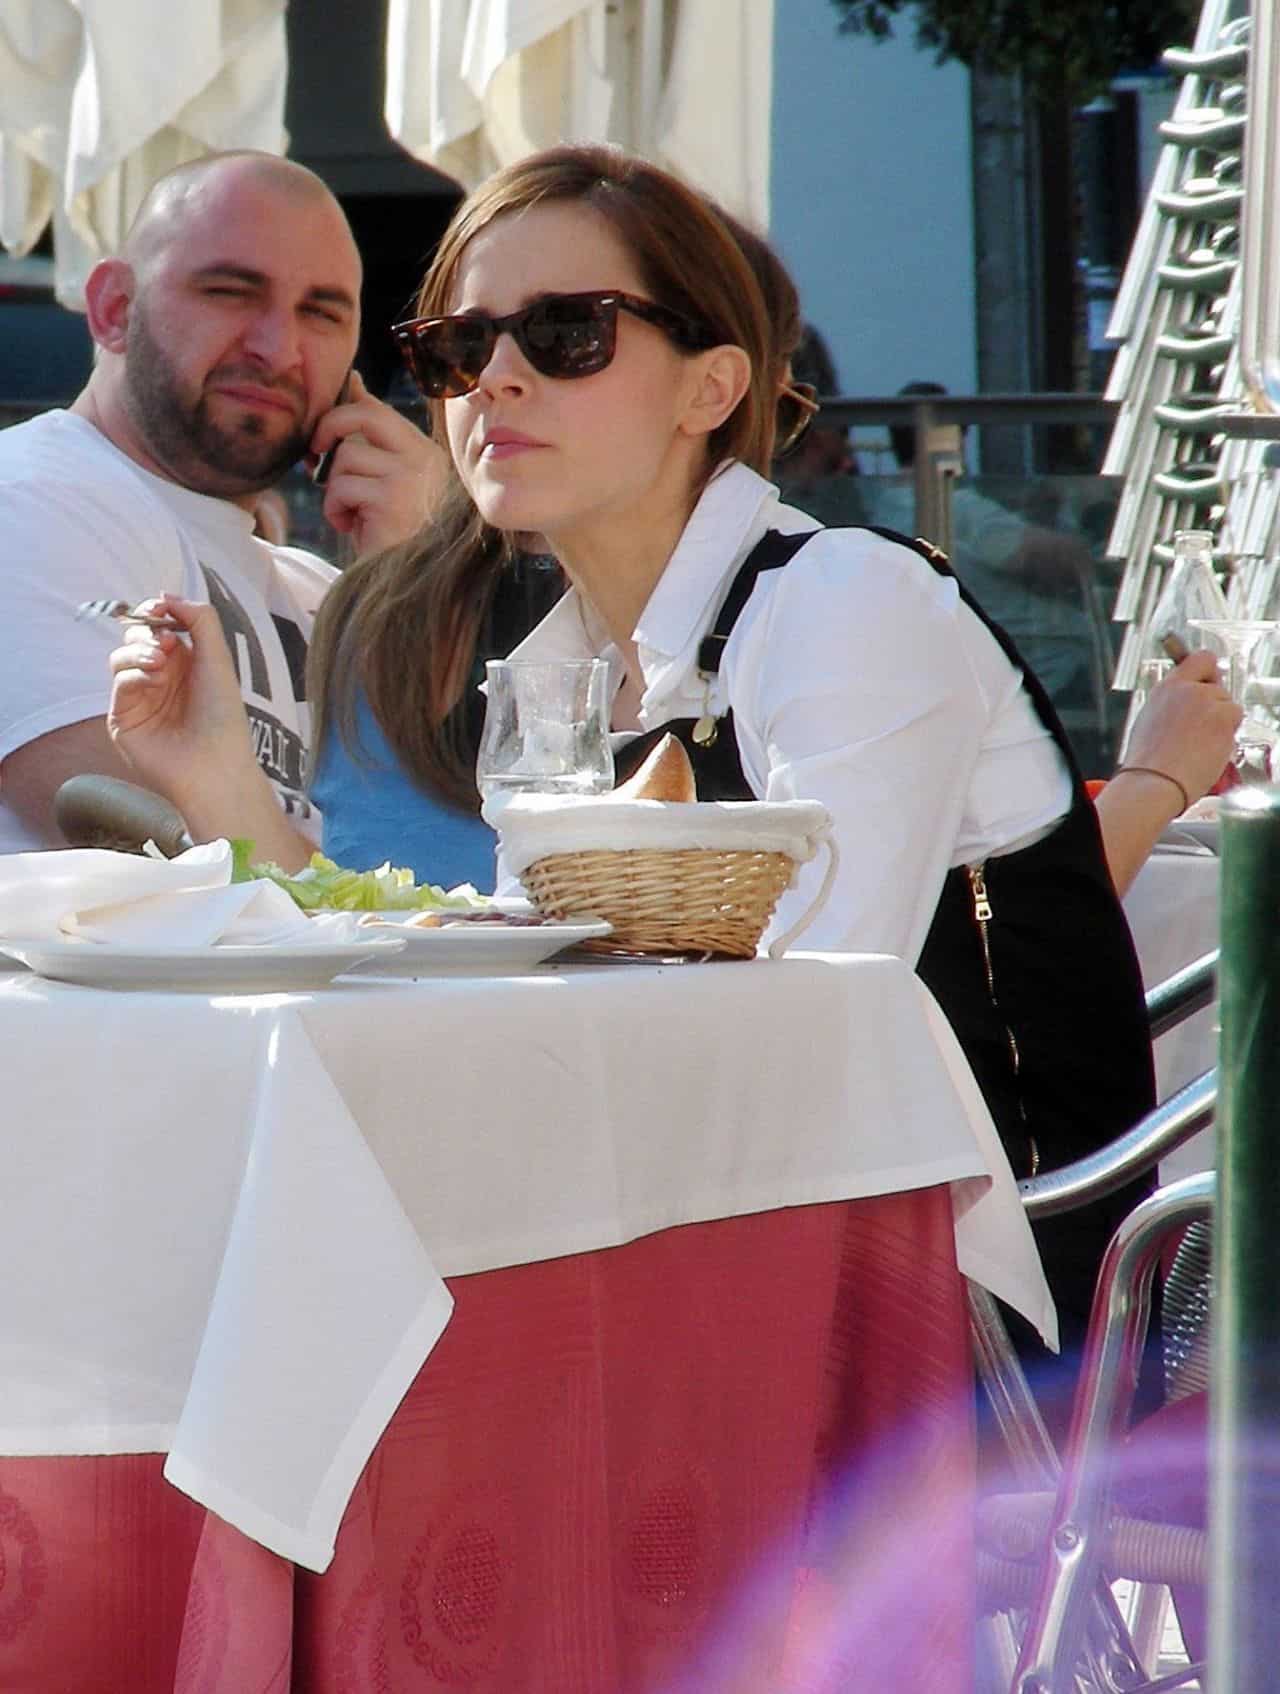 Emma Watson was Absolutely Gorgeous During Lunch with her Mom in Madrid